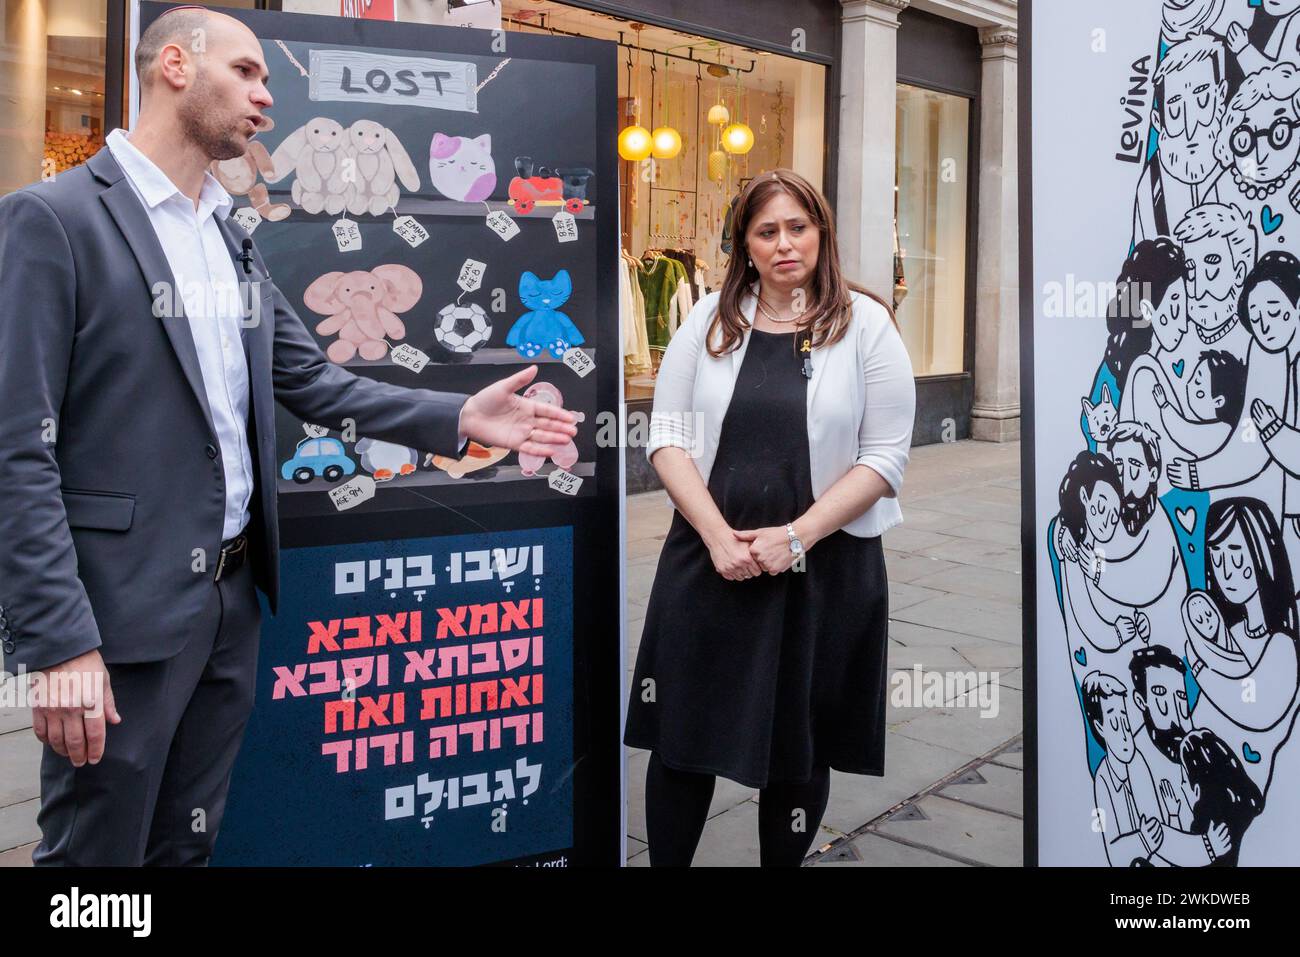 Oxford Circus, London, UK. 20th February 2024. Matan Bar Noy, Head of WZO in the UK and Europe, shows Tzipi Hotovely, Israeli Ambassador to the United Kingdom, visits an Art Exhibition created by artists based in Israel following the horrific events of October 7th.  The World Zionist Organisation’s (WZO) set up a powerful exhibition depicting the collective pain of the Israeli people since the atrocities committed by the terror organization Hamas and illustrate the many facets of grief and concern around those who were kidnapped and murdered. Photo by Amanda Rose/Alamy Live News Stock Photo